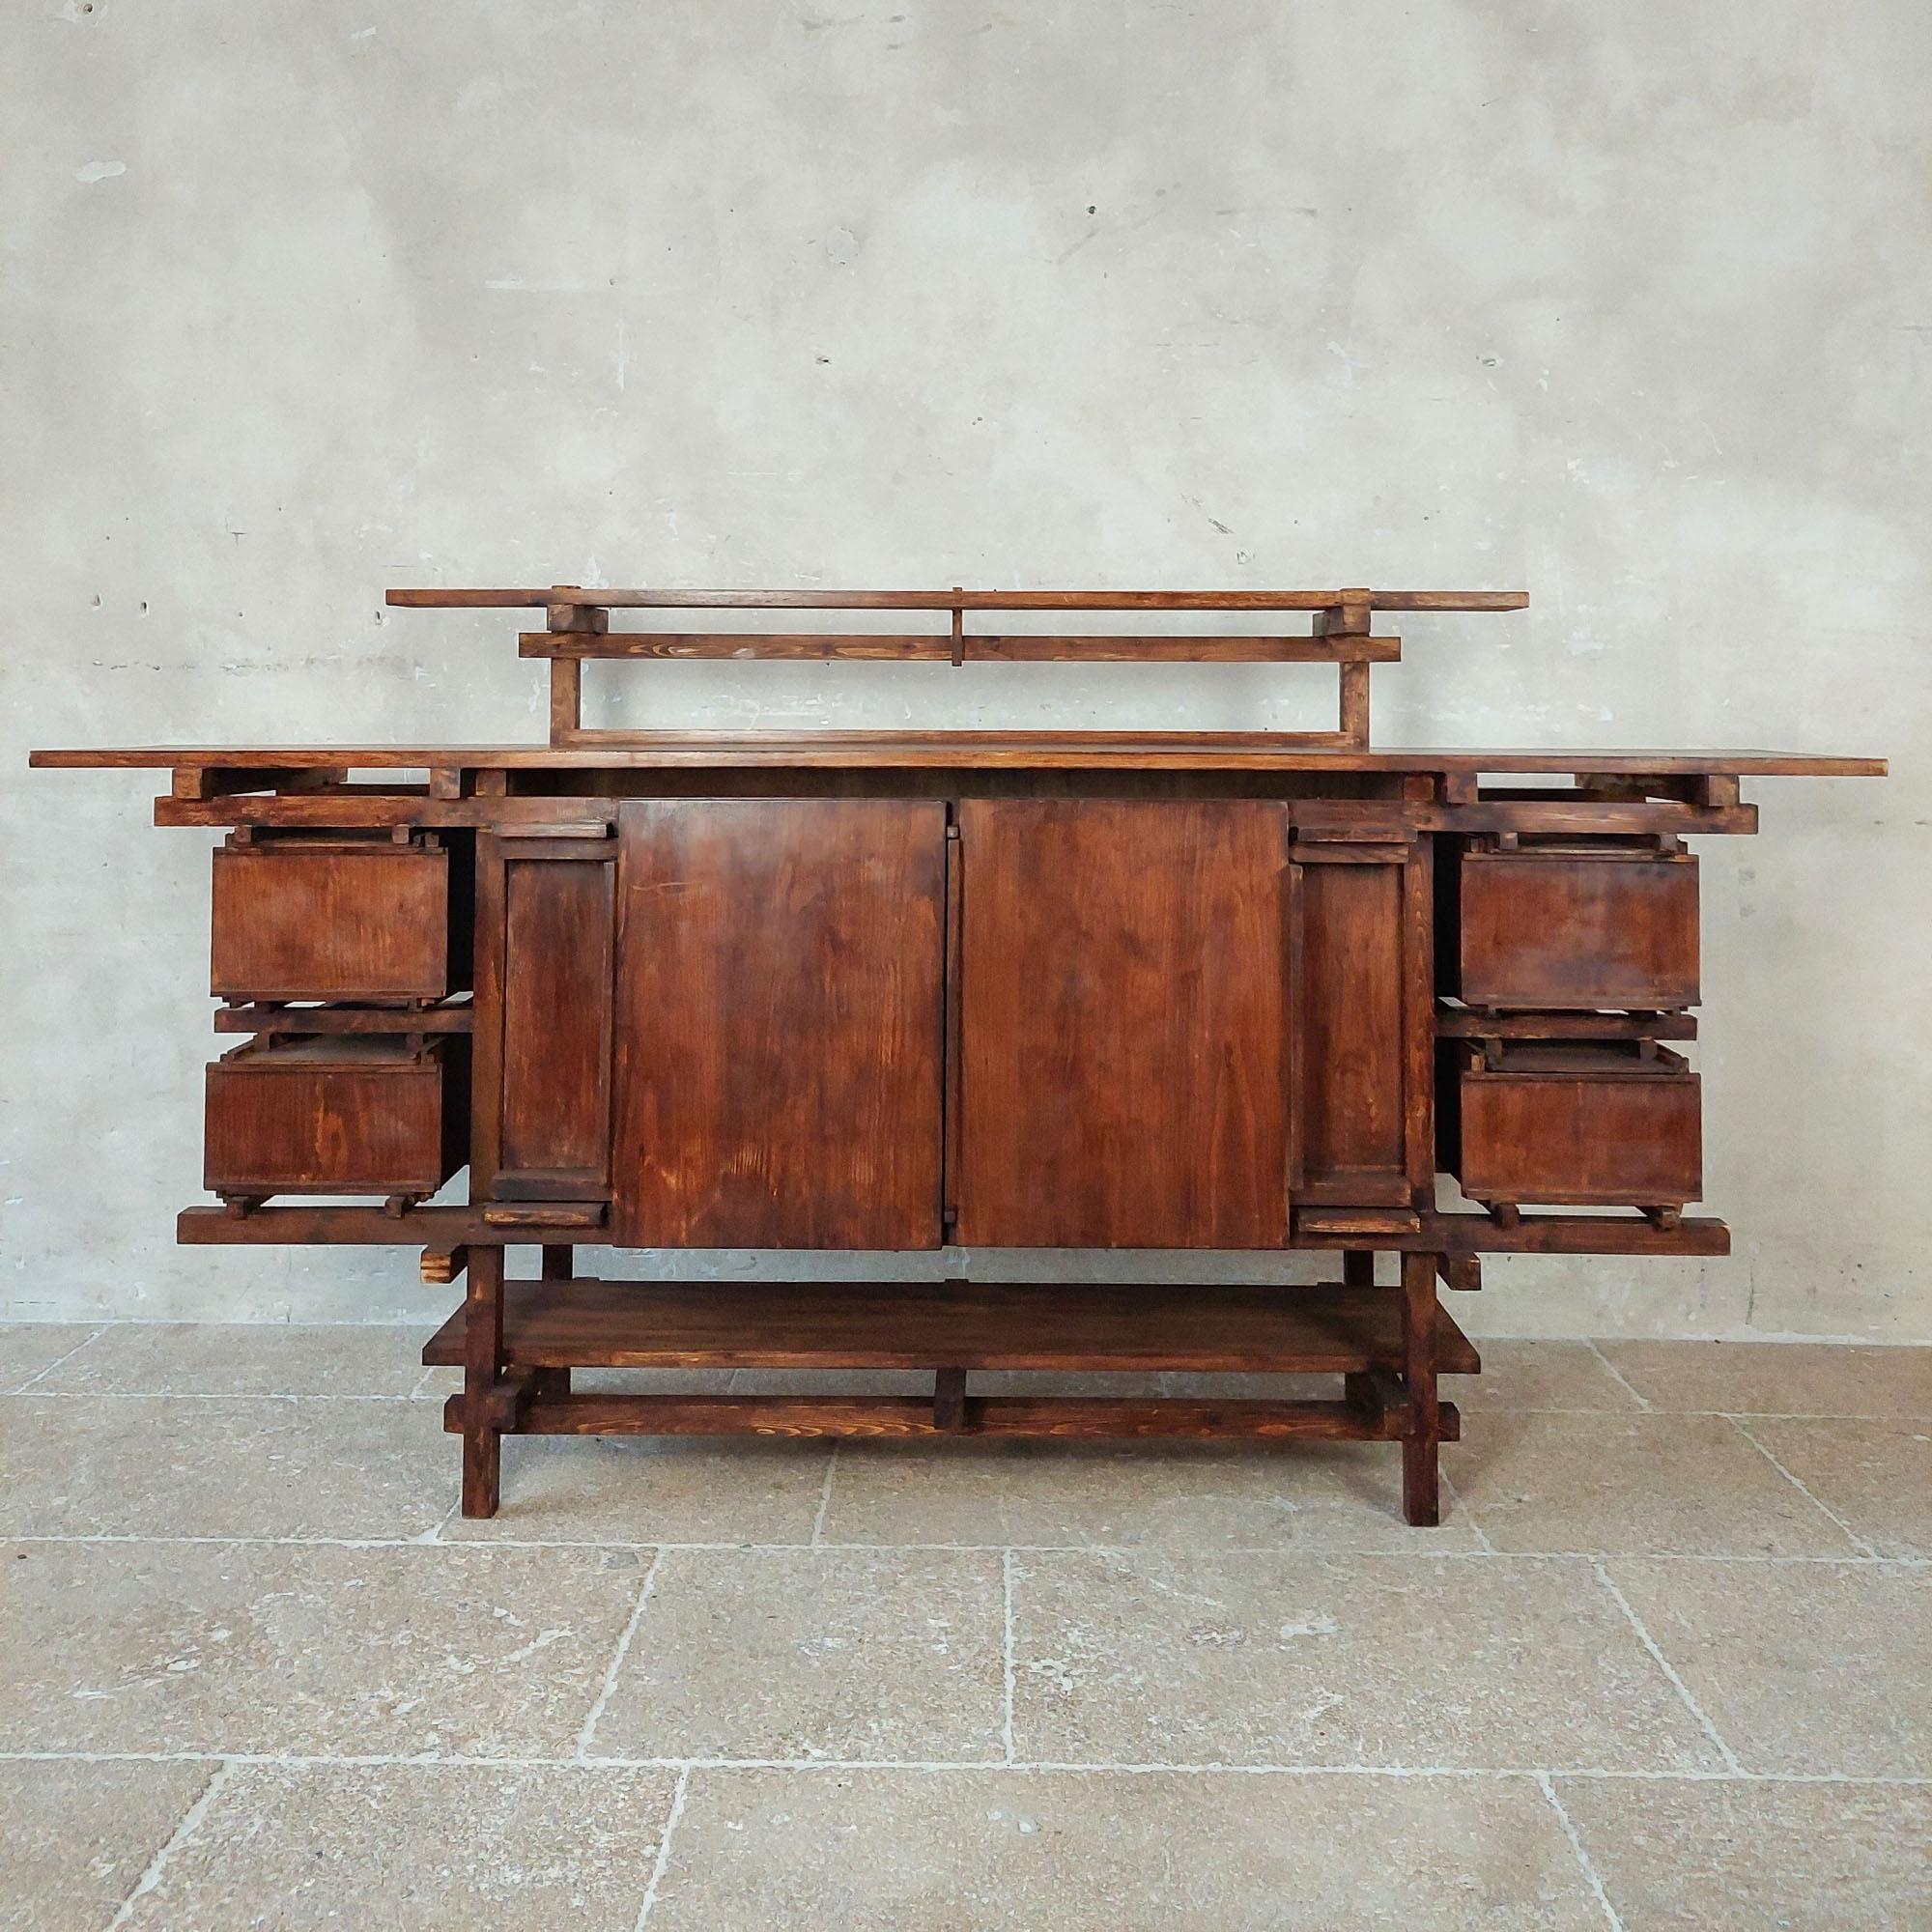 Elling buffet after the original from 1919, designed by Gerrit Rietveld.

The original buffet was designed by Gerrit Rietveld and made for fellow architect Piet Elling in 1919. This sideboard was originally used in the model home designed by J.P Oud